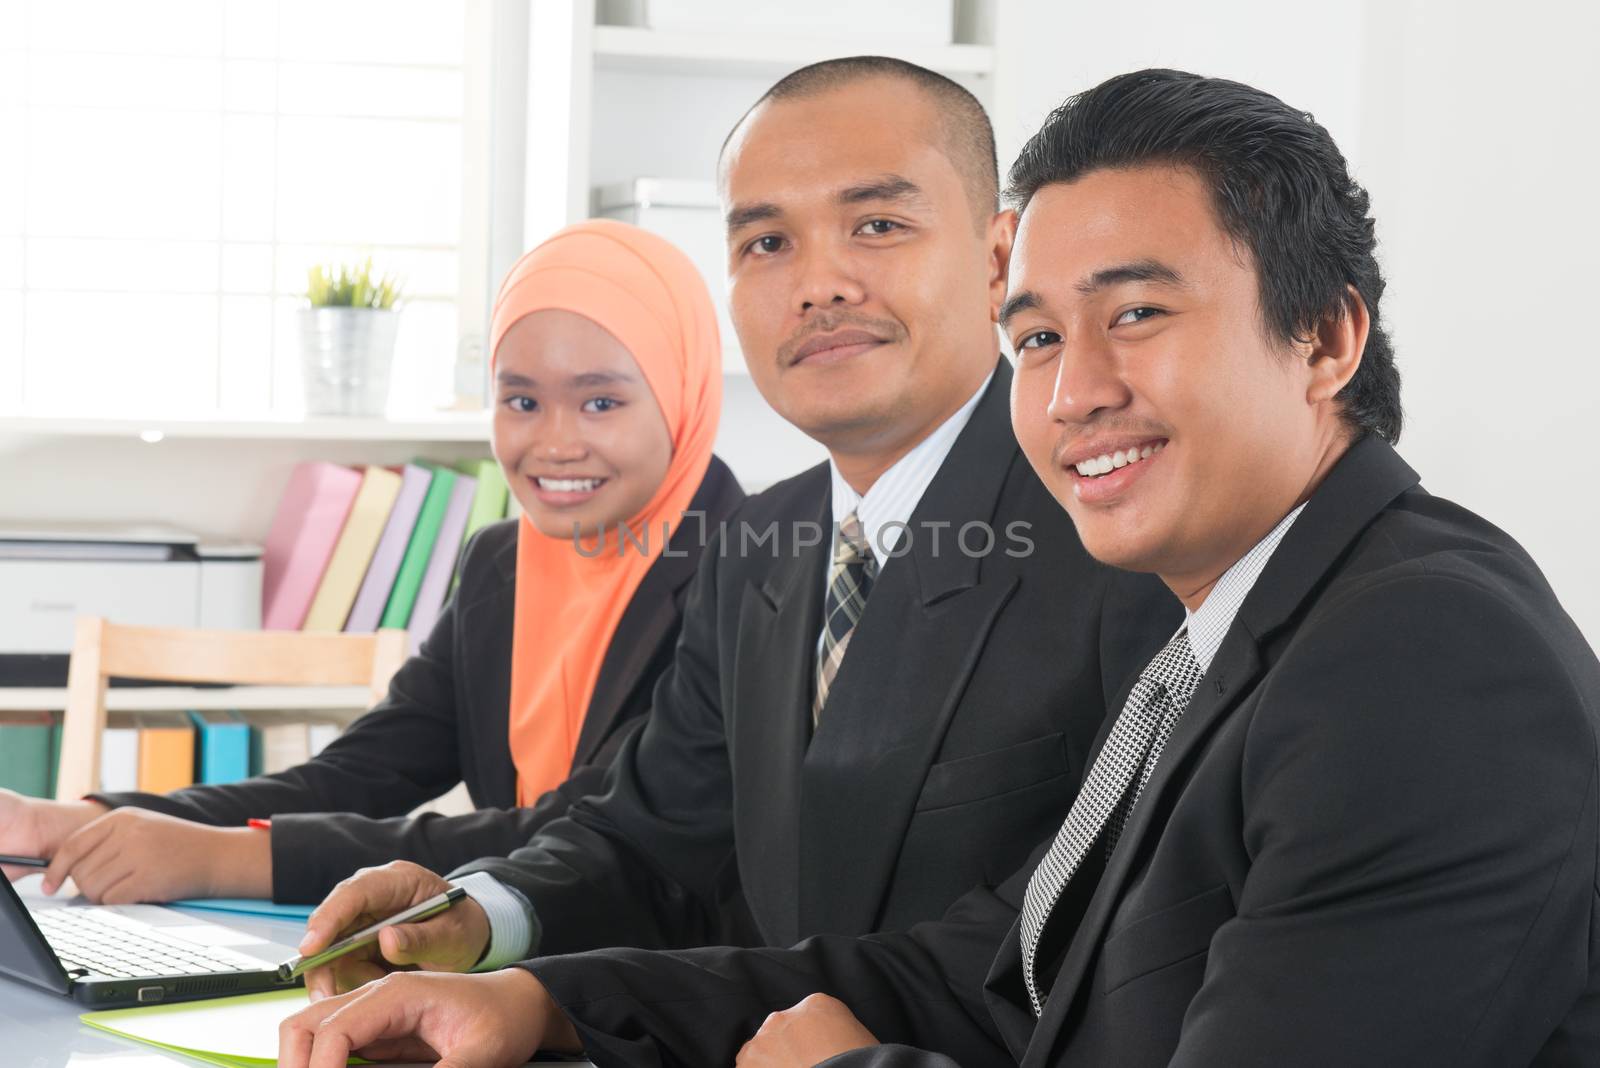 Group of Malaysian businesspeople meeting or having discussion on desk inside office room.